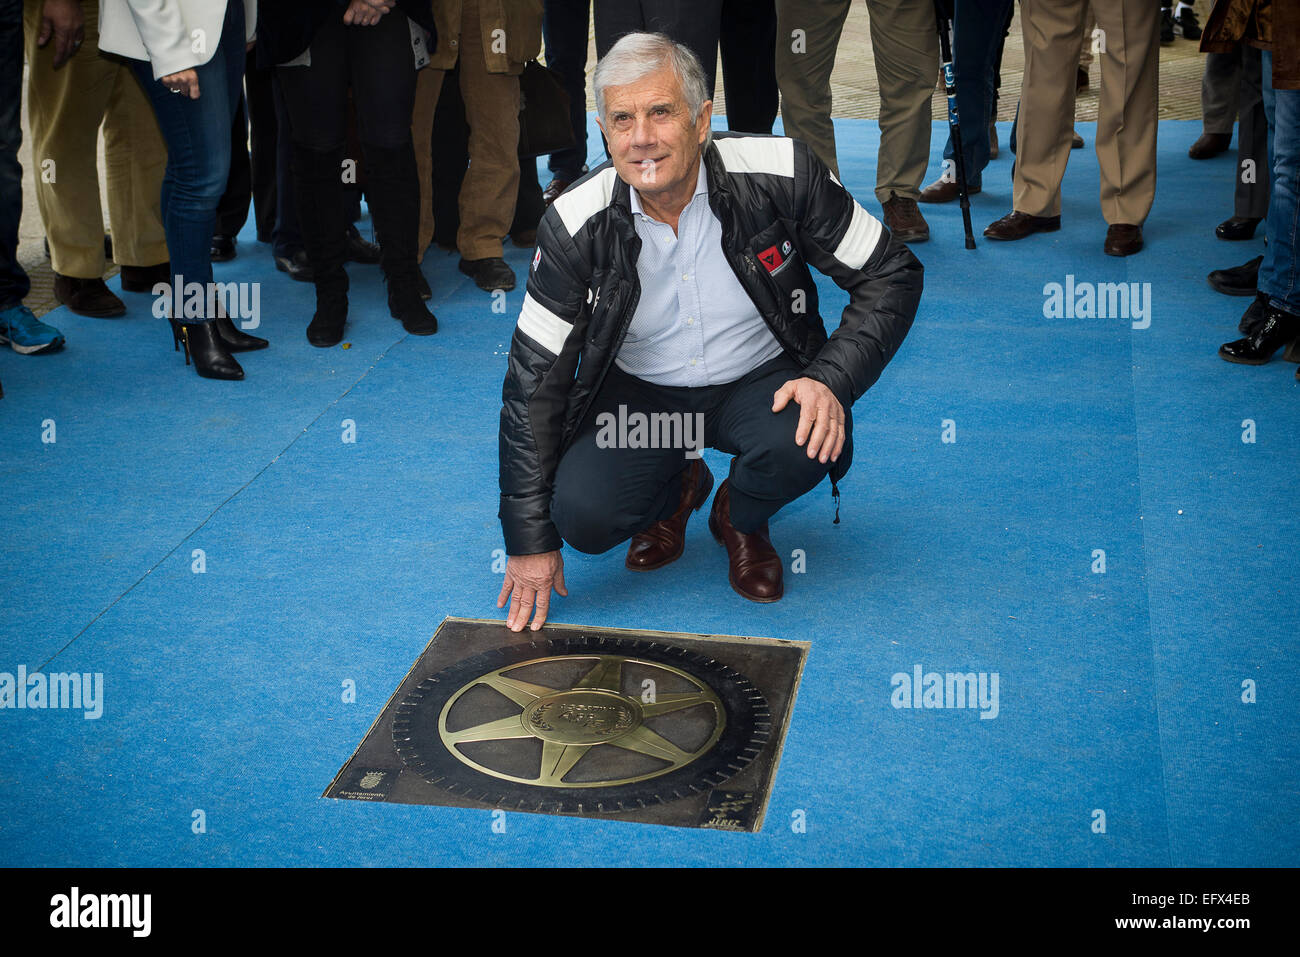 Jerez de la Frontera, Andalusia, Spain, 11 February, 2015: Giacomo Agostini, Italian motorbike rider with more victories in Grand Prix motorcycle racing, places the second star in The Motorcycle Walk of The Fame in Jerez de la Frontera. Stock Photo